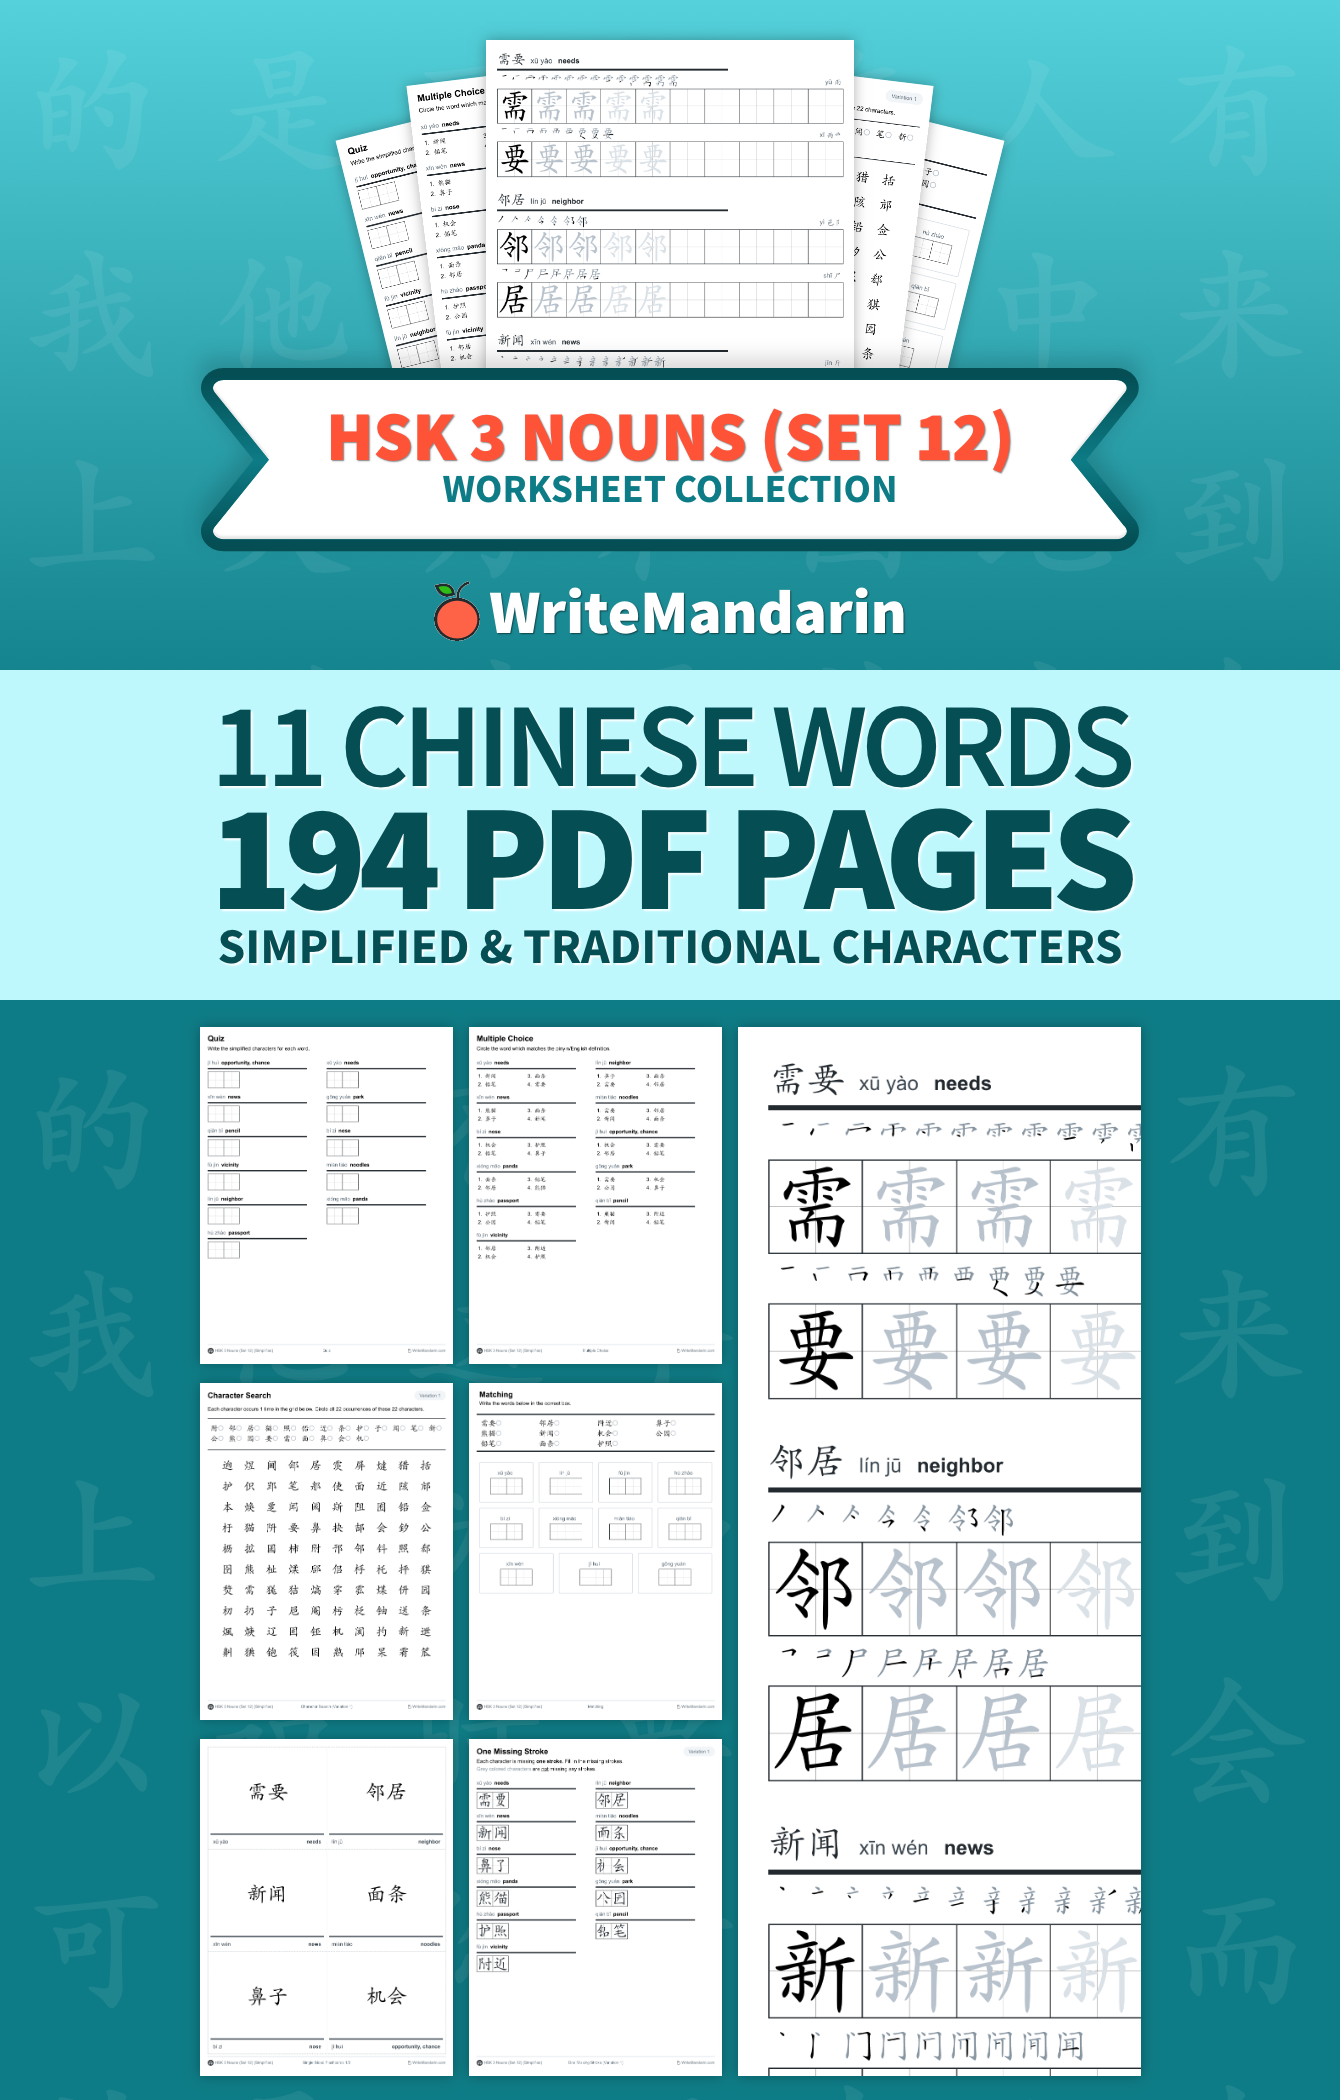 Preview image of HSK 3 Nouns (Set 12) worksheet collection